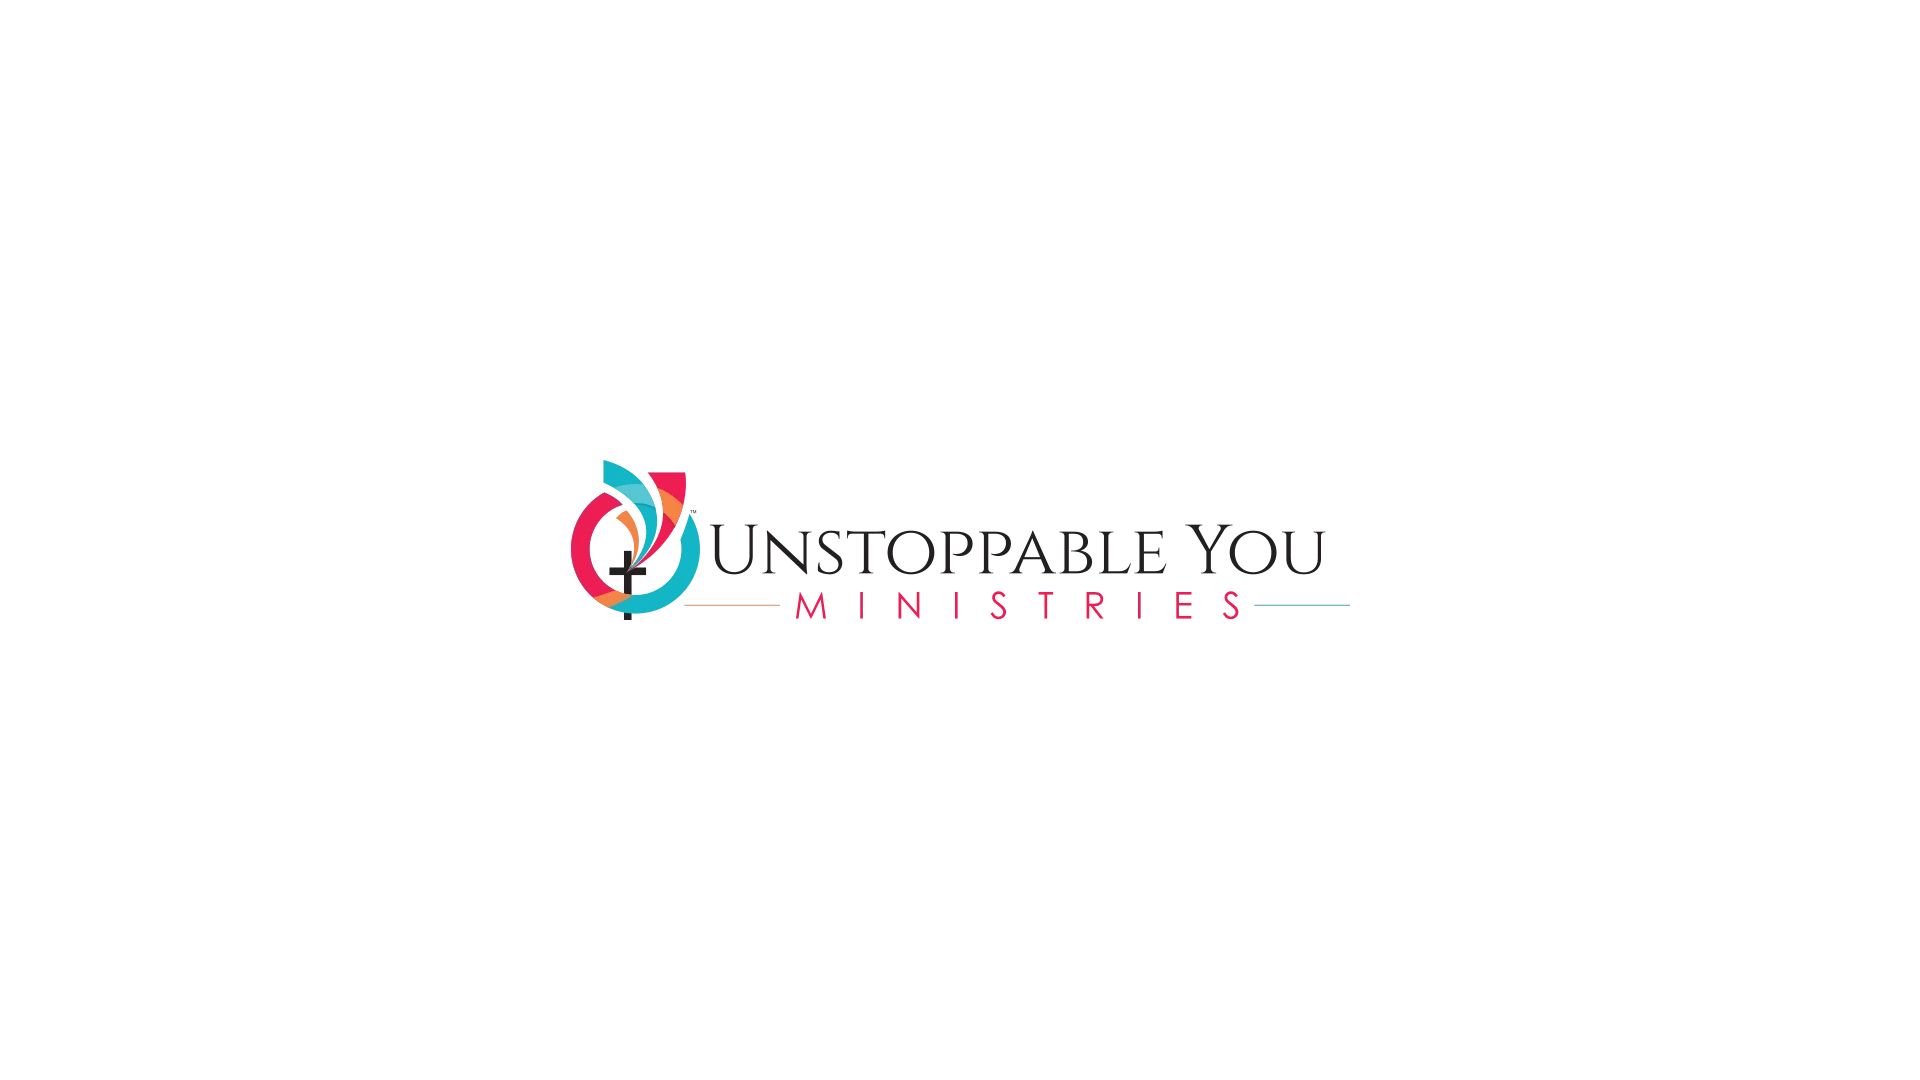 Unstoppable You Ministries logo